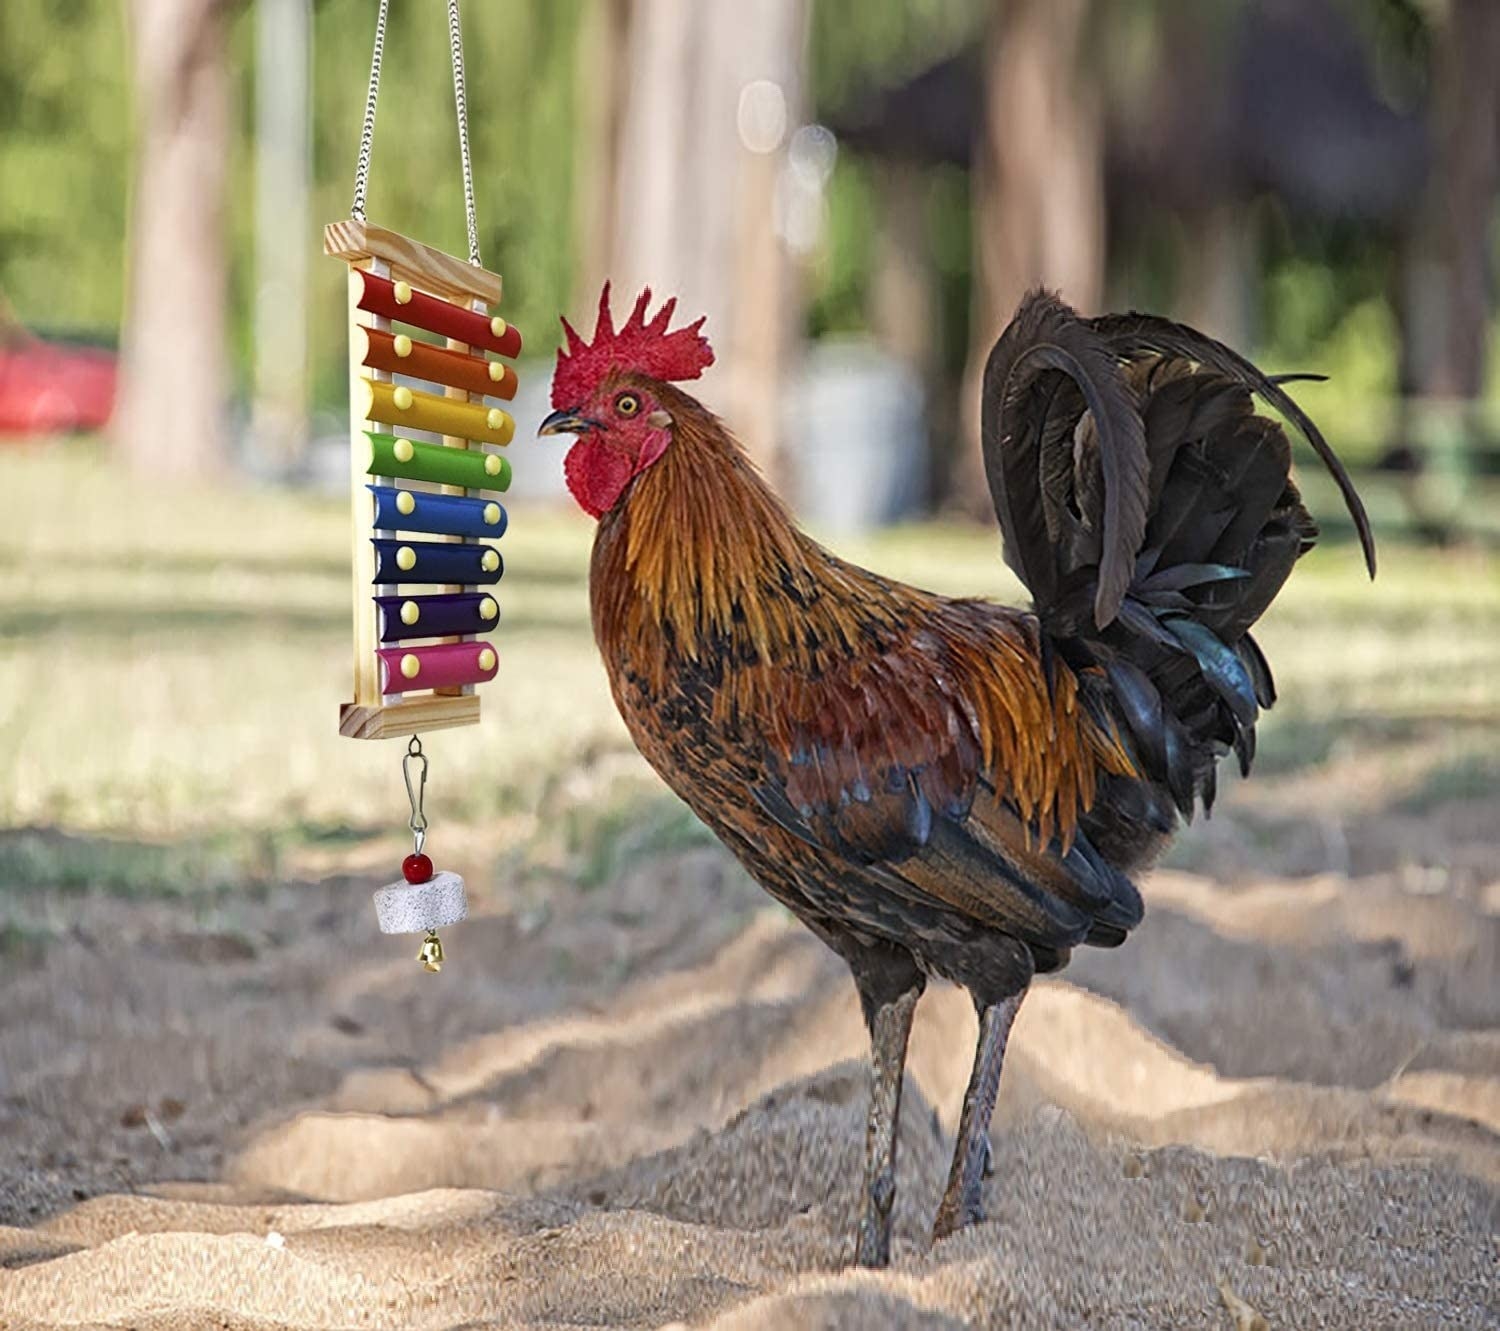 A chicken and a xylophone